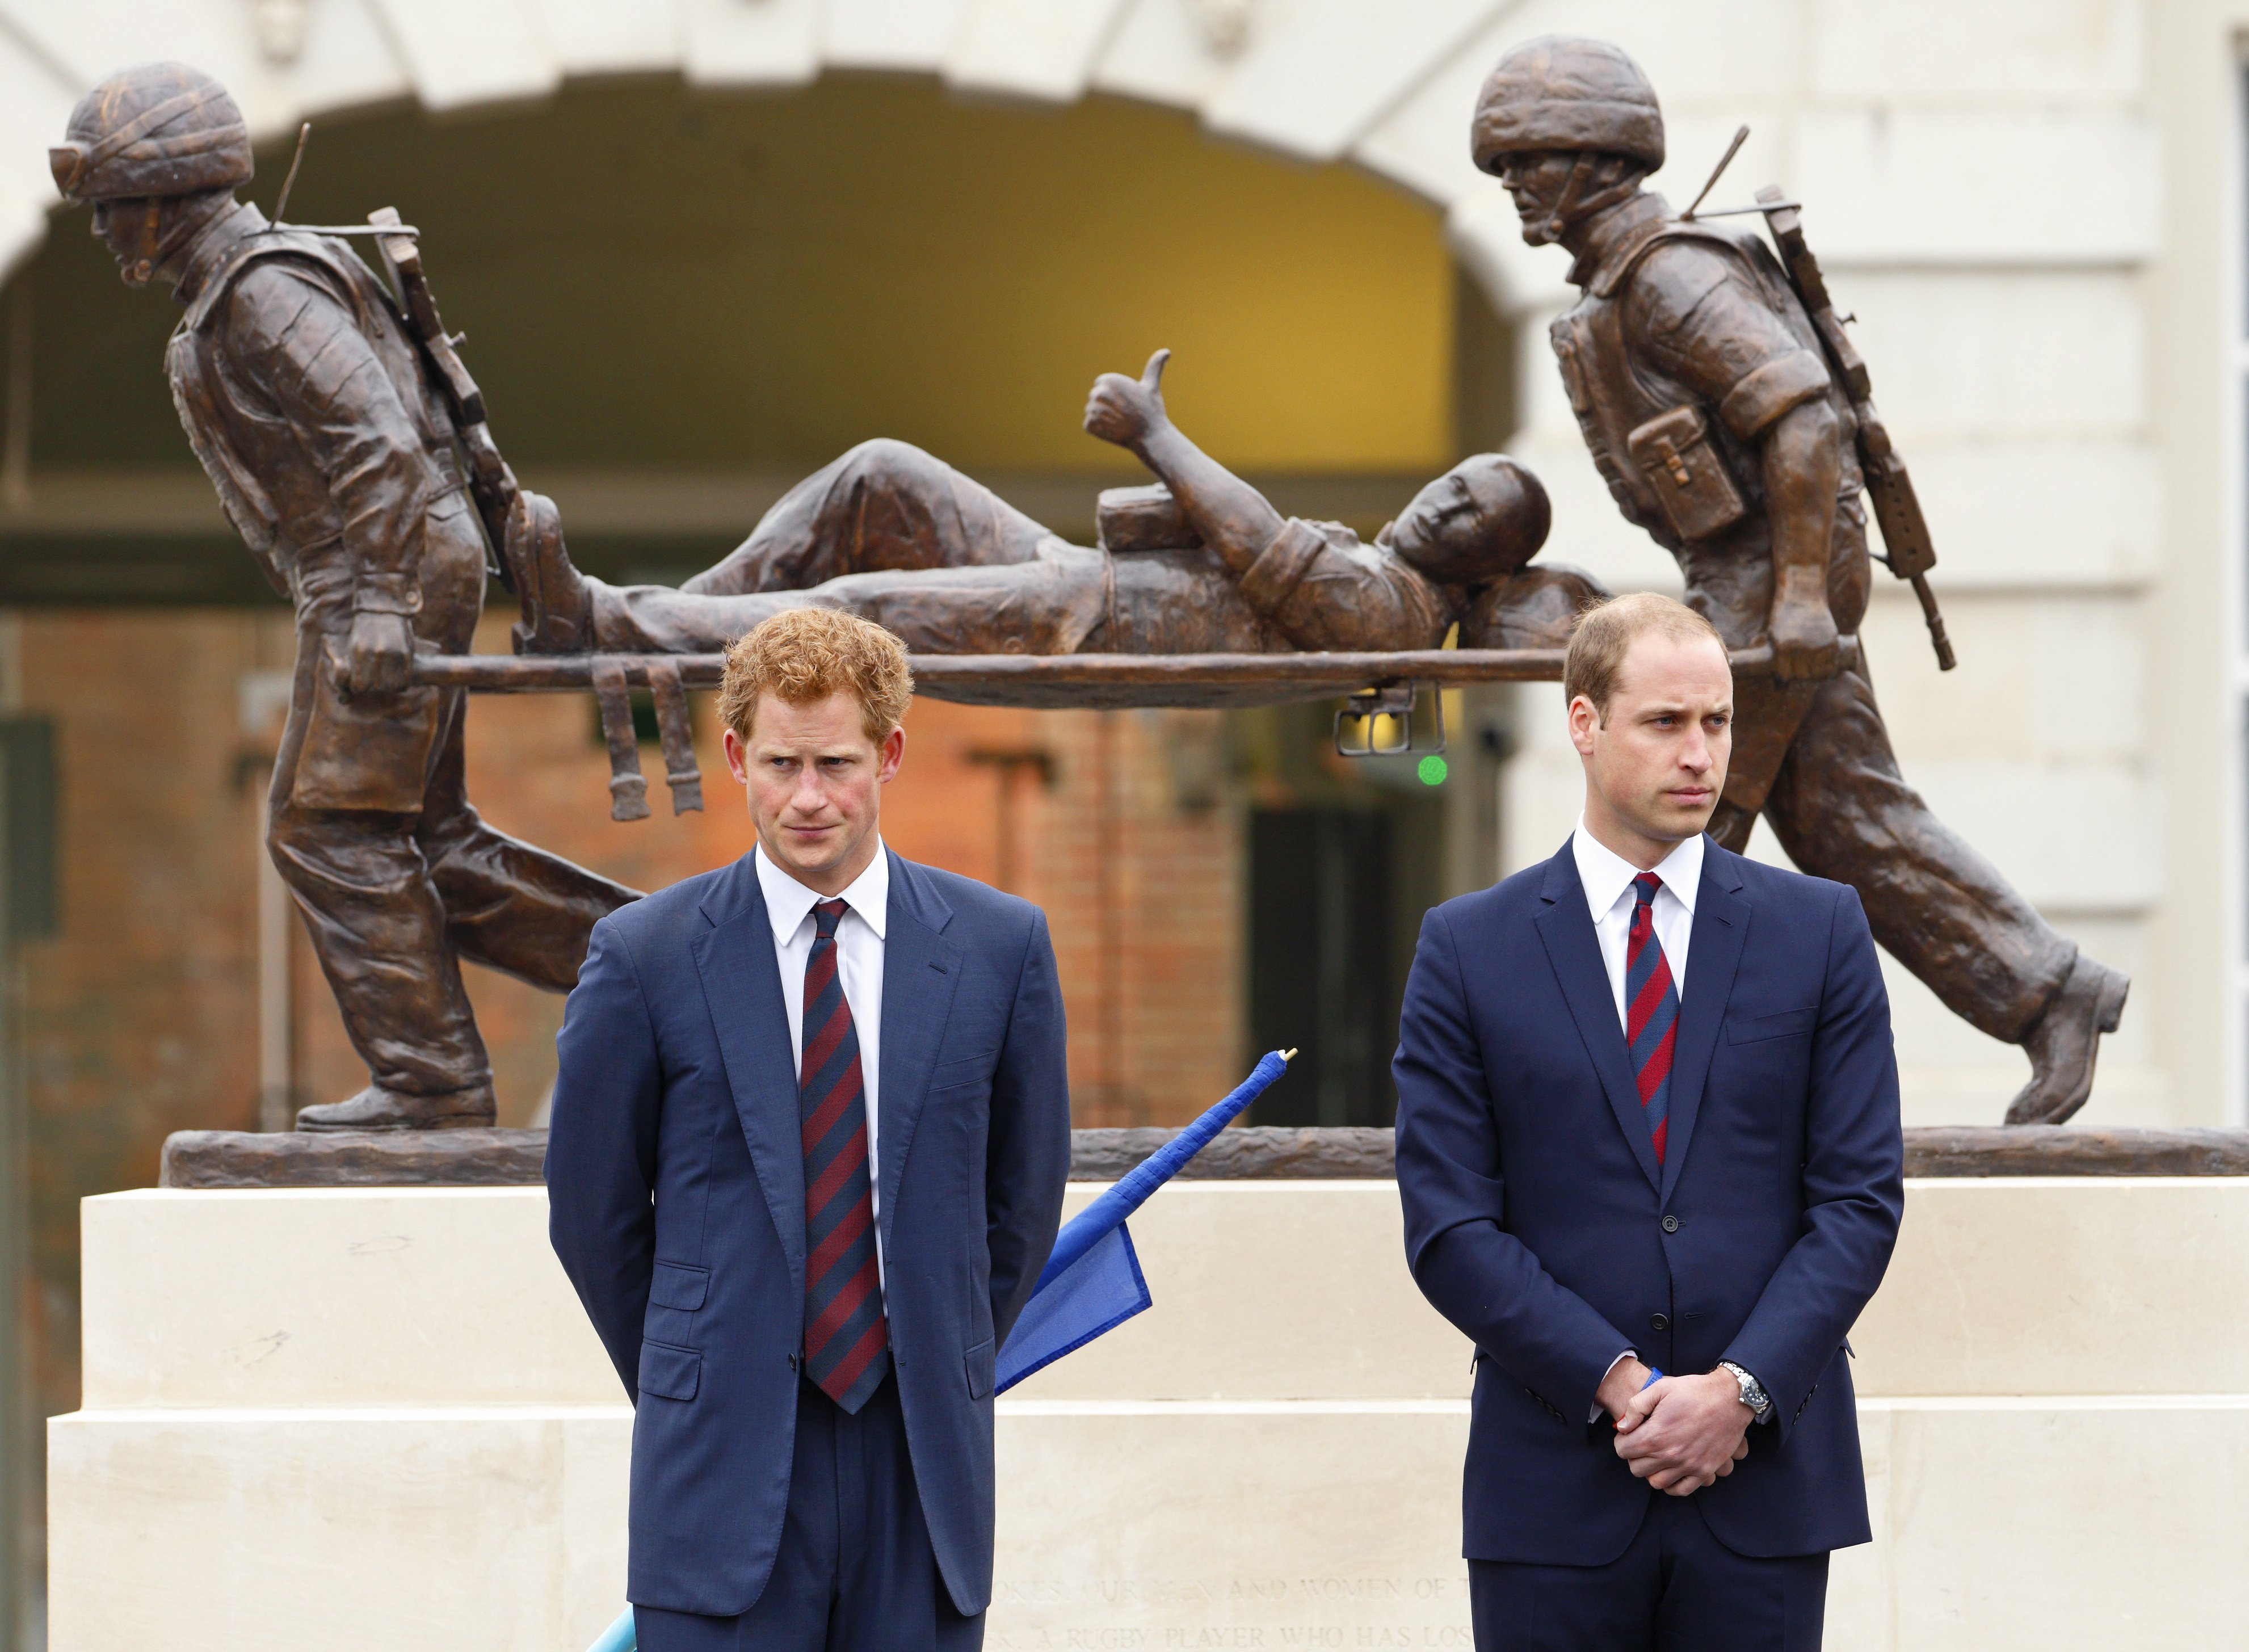 Prince Harry and Prince William standing in front of the Help for Heroes statue during the opening of the new Help for Heroes Recovery Centre at Tedworth House on May 20, 2013 in Tidworth, England. / Source: Getty Images